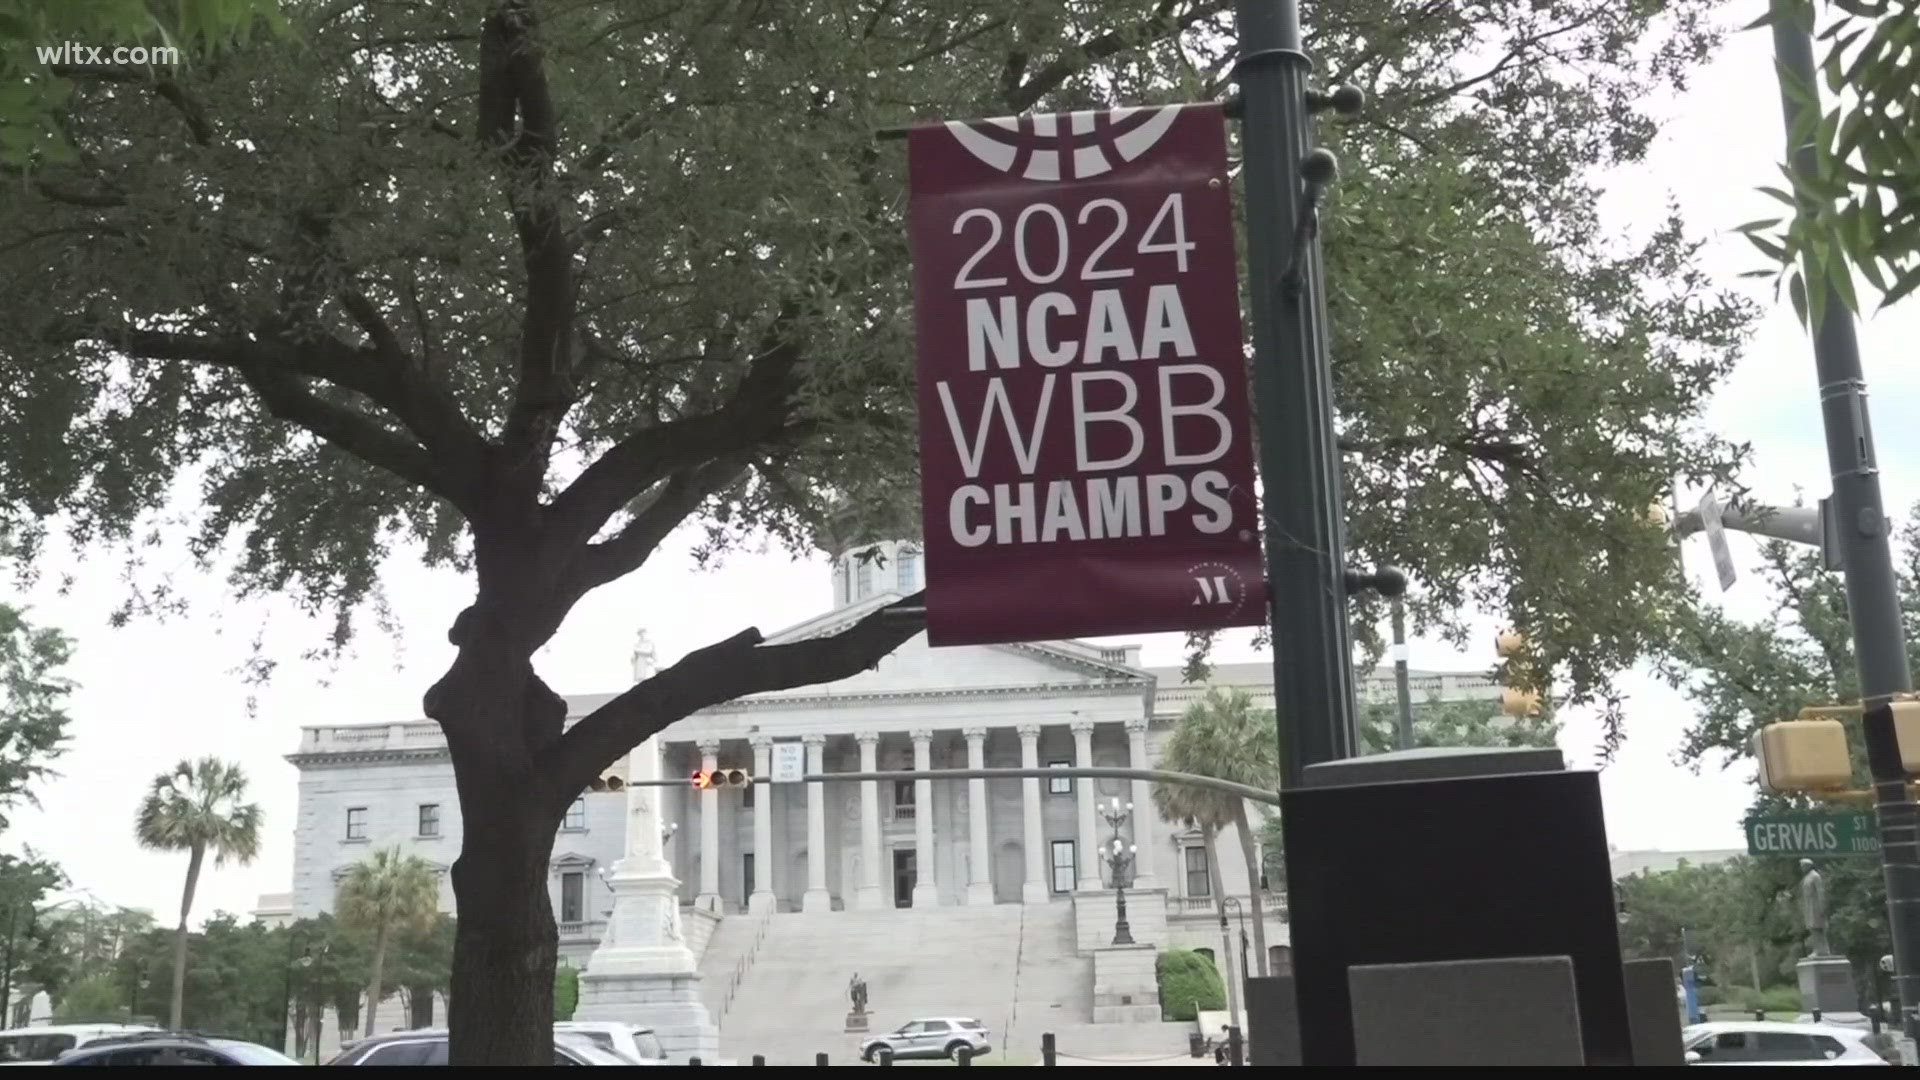 The banners, which hang on the light posts on Main Street, celebrate the USC women's basketball win, but some folks want them for themselves.